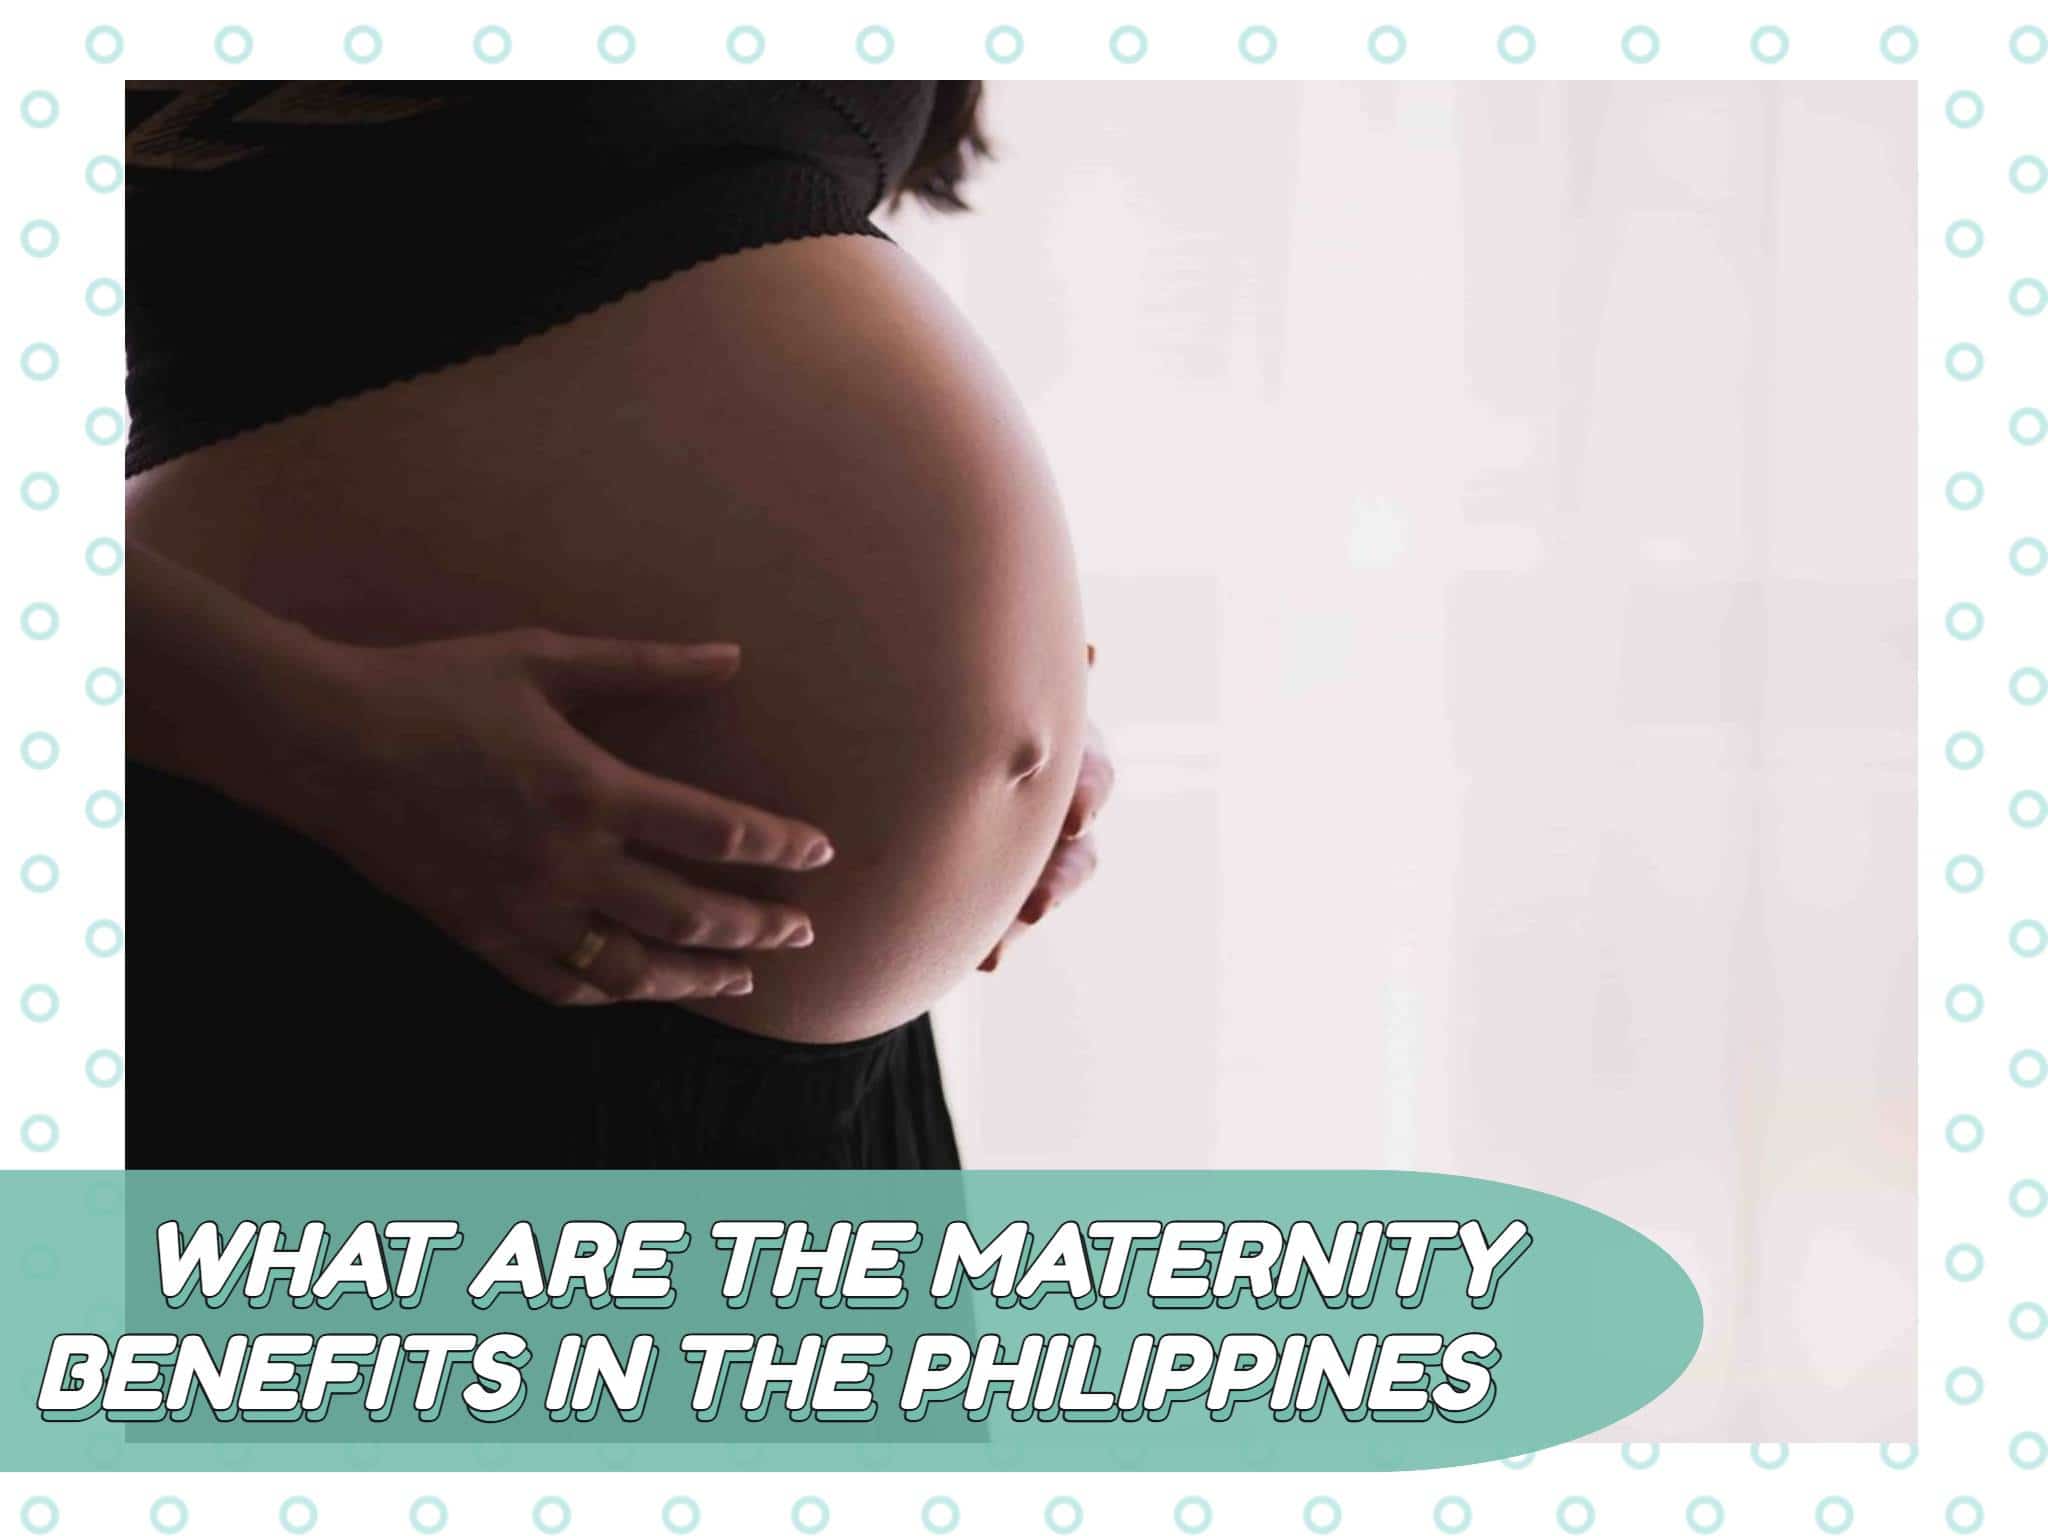 what are the maternity benefits in the philippines